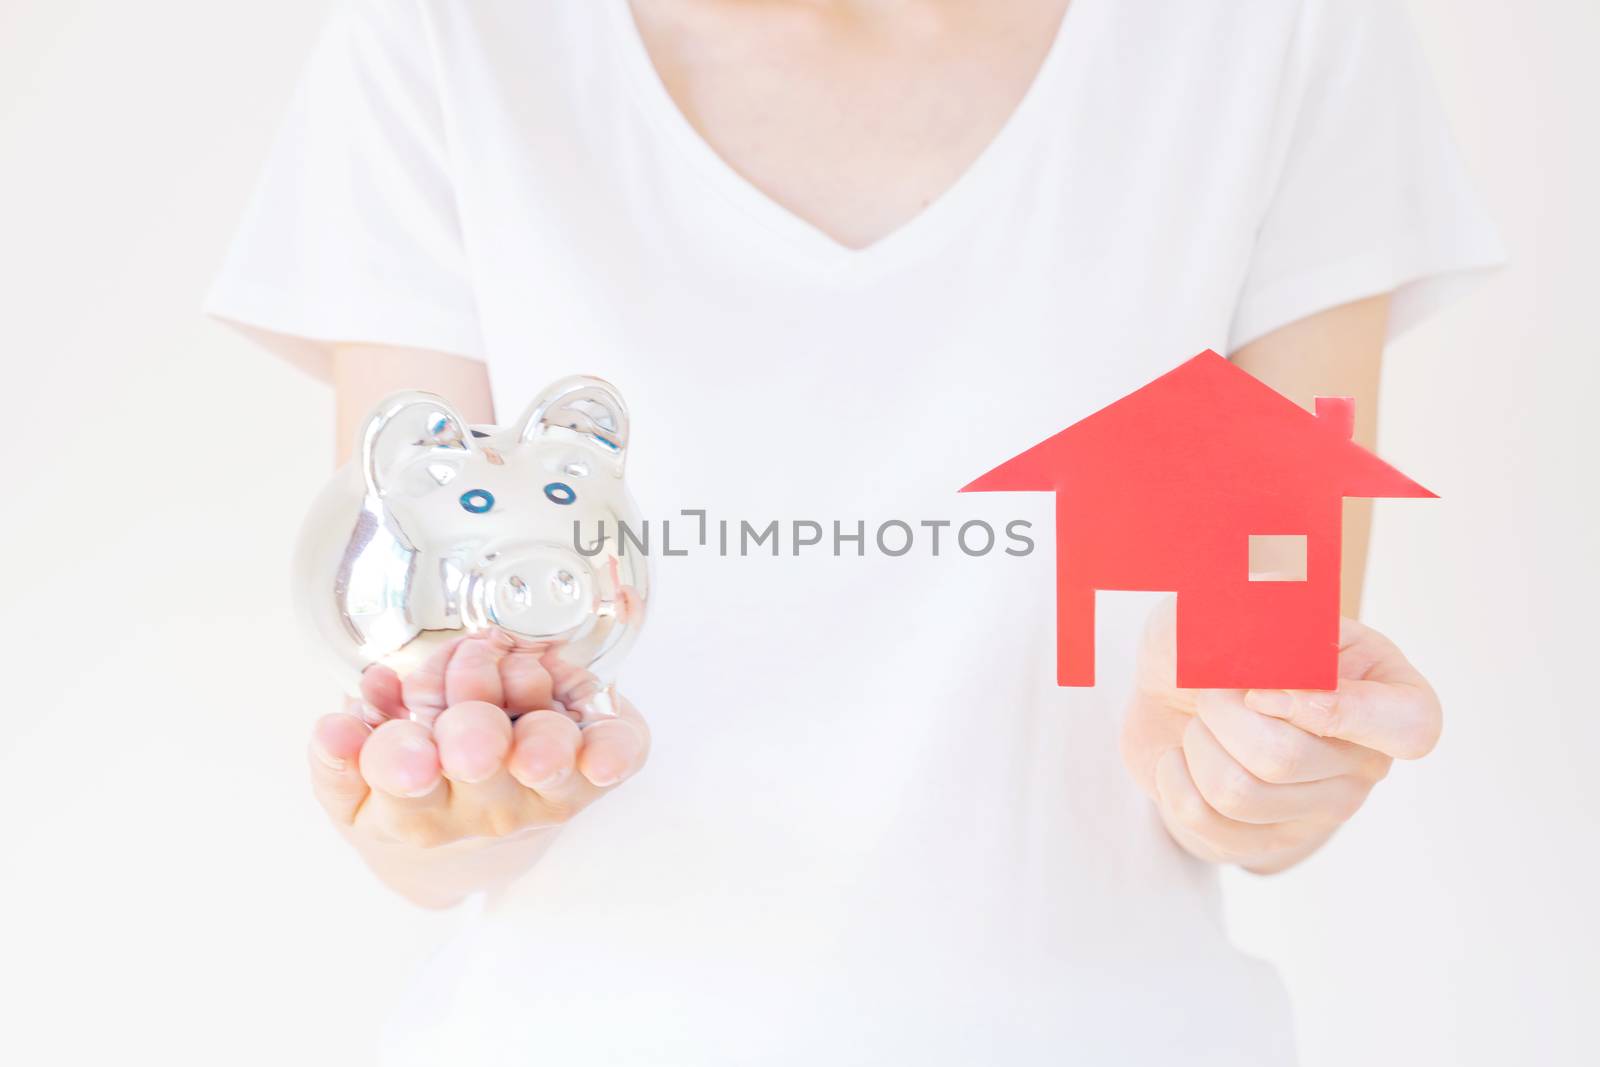 Hands holding a piggy bank and a house model.